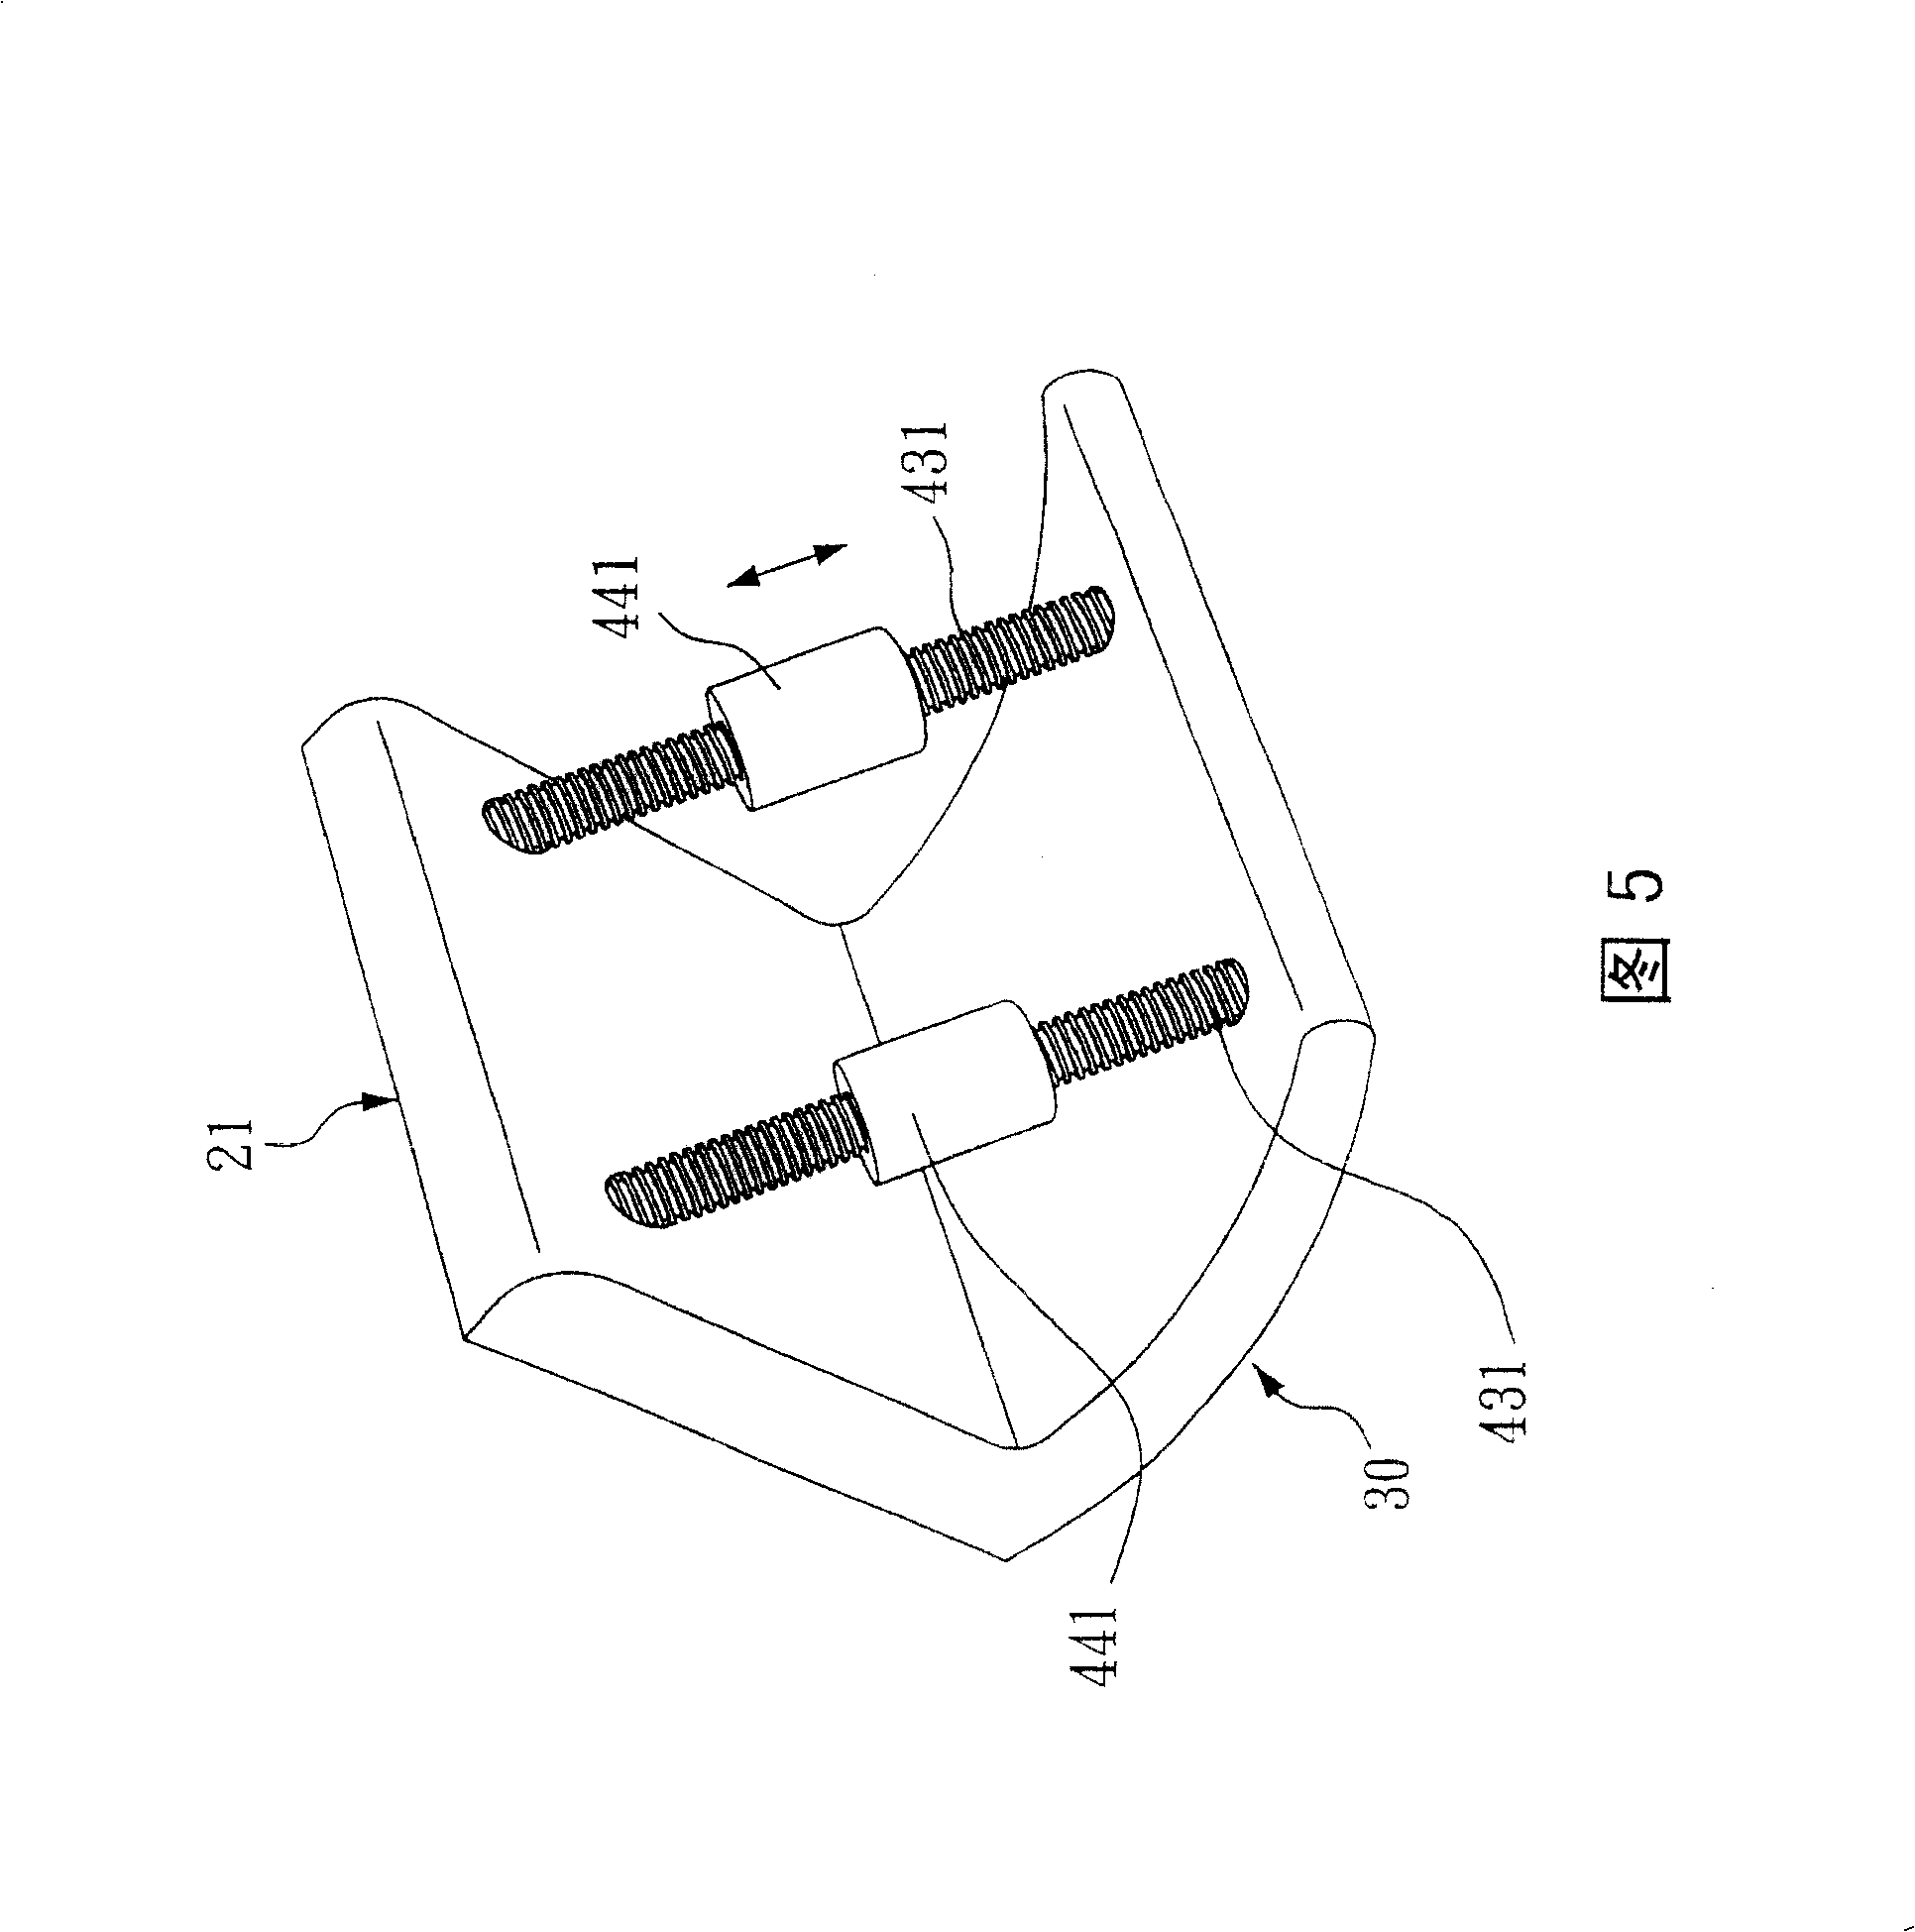 Displaying device capable of regulating balance weight